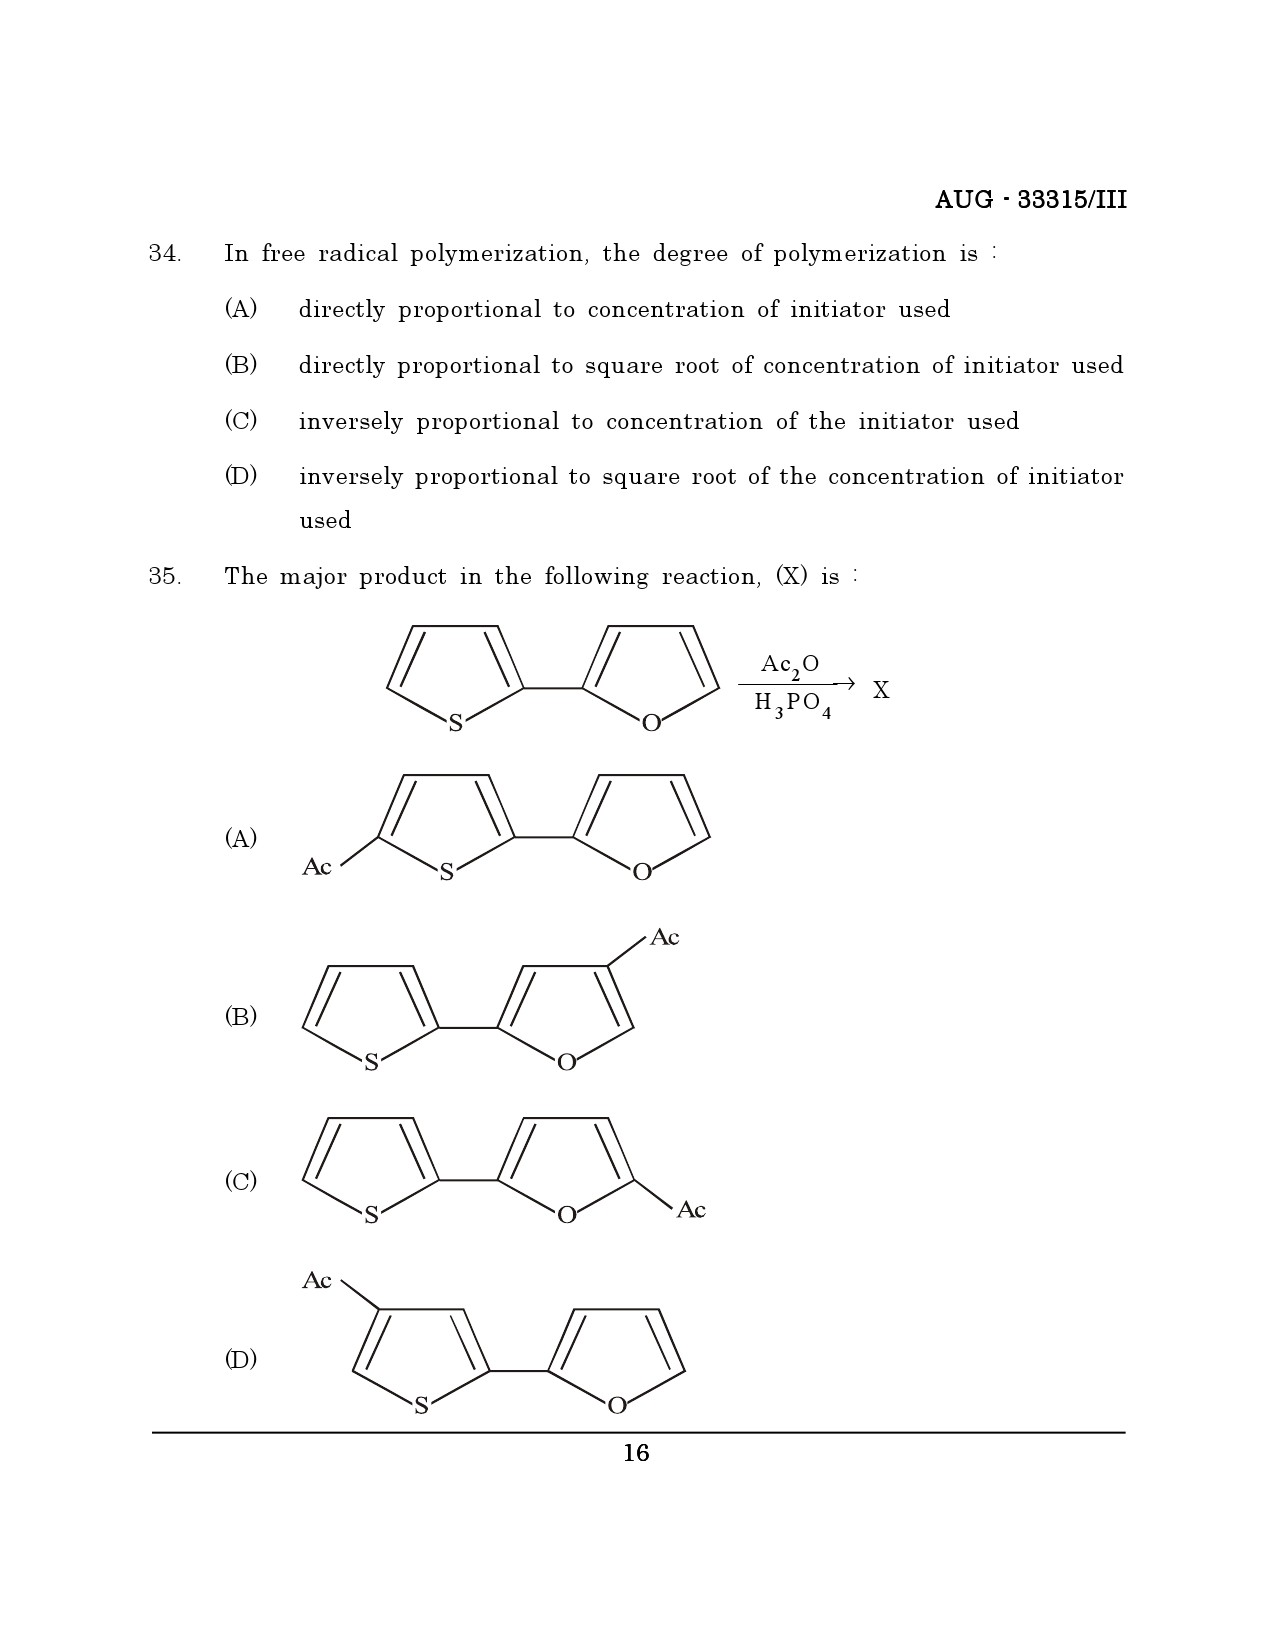 Maharashtra SET Chemical Sciences Question Paper III August 2015 15